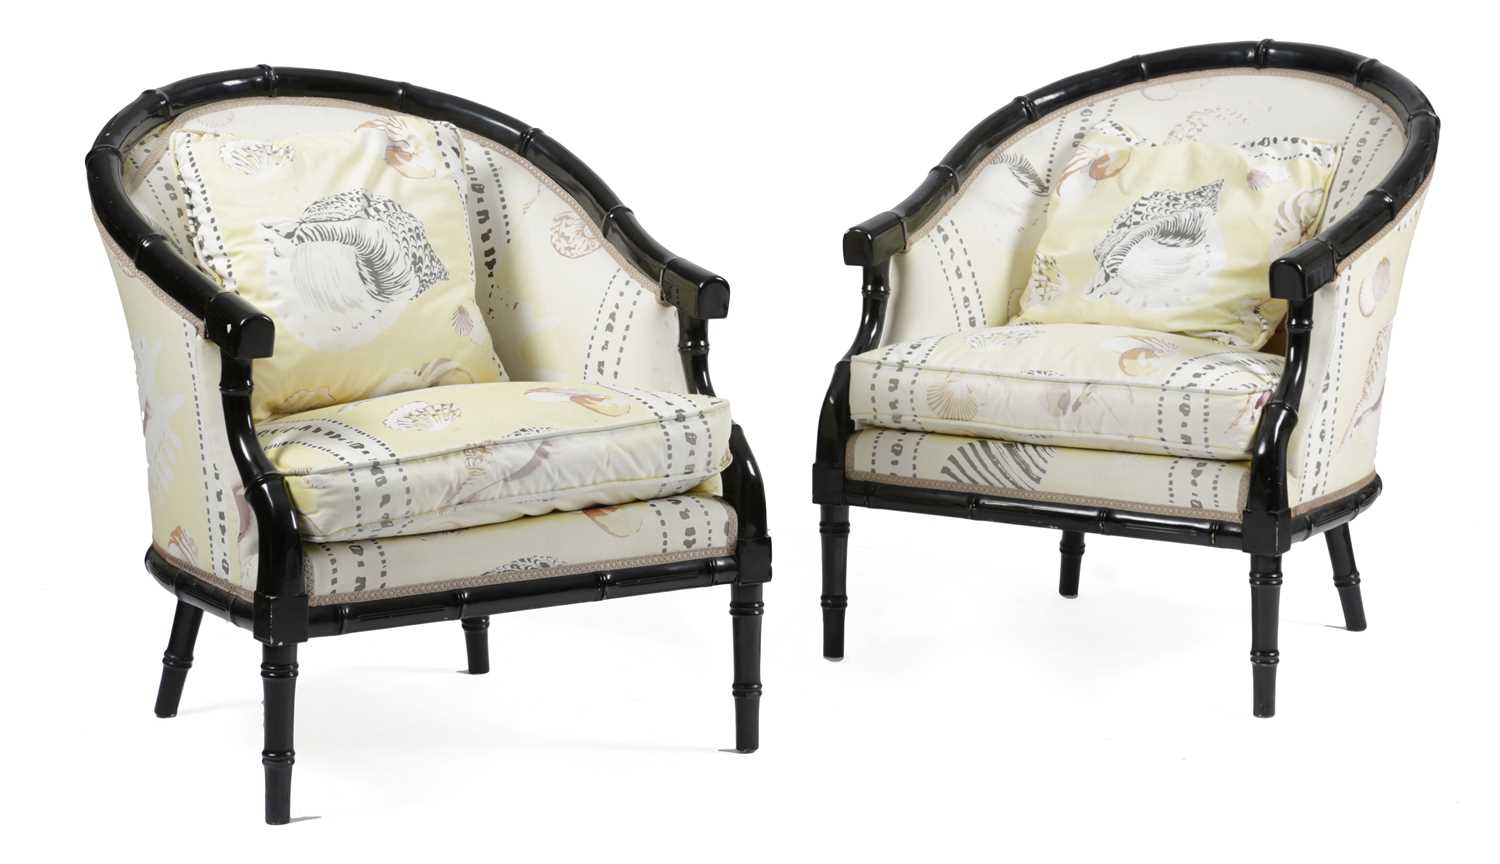 A PAIR OF BLACK LACQUER FAUX BAMBOO ARMCHAIRS LATE 20TH CENTURY upholstered with seashell cotton